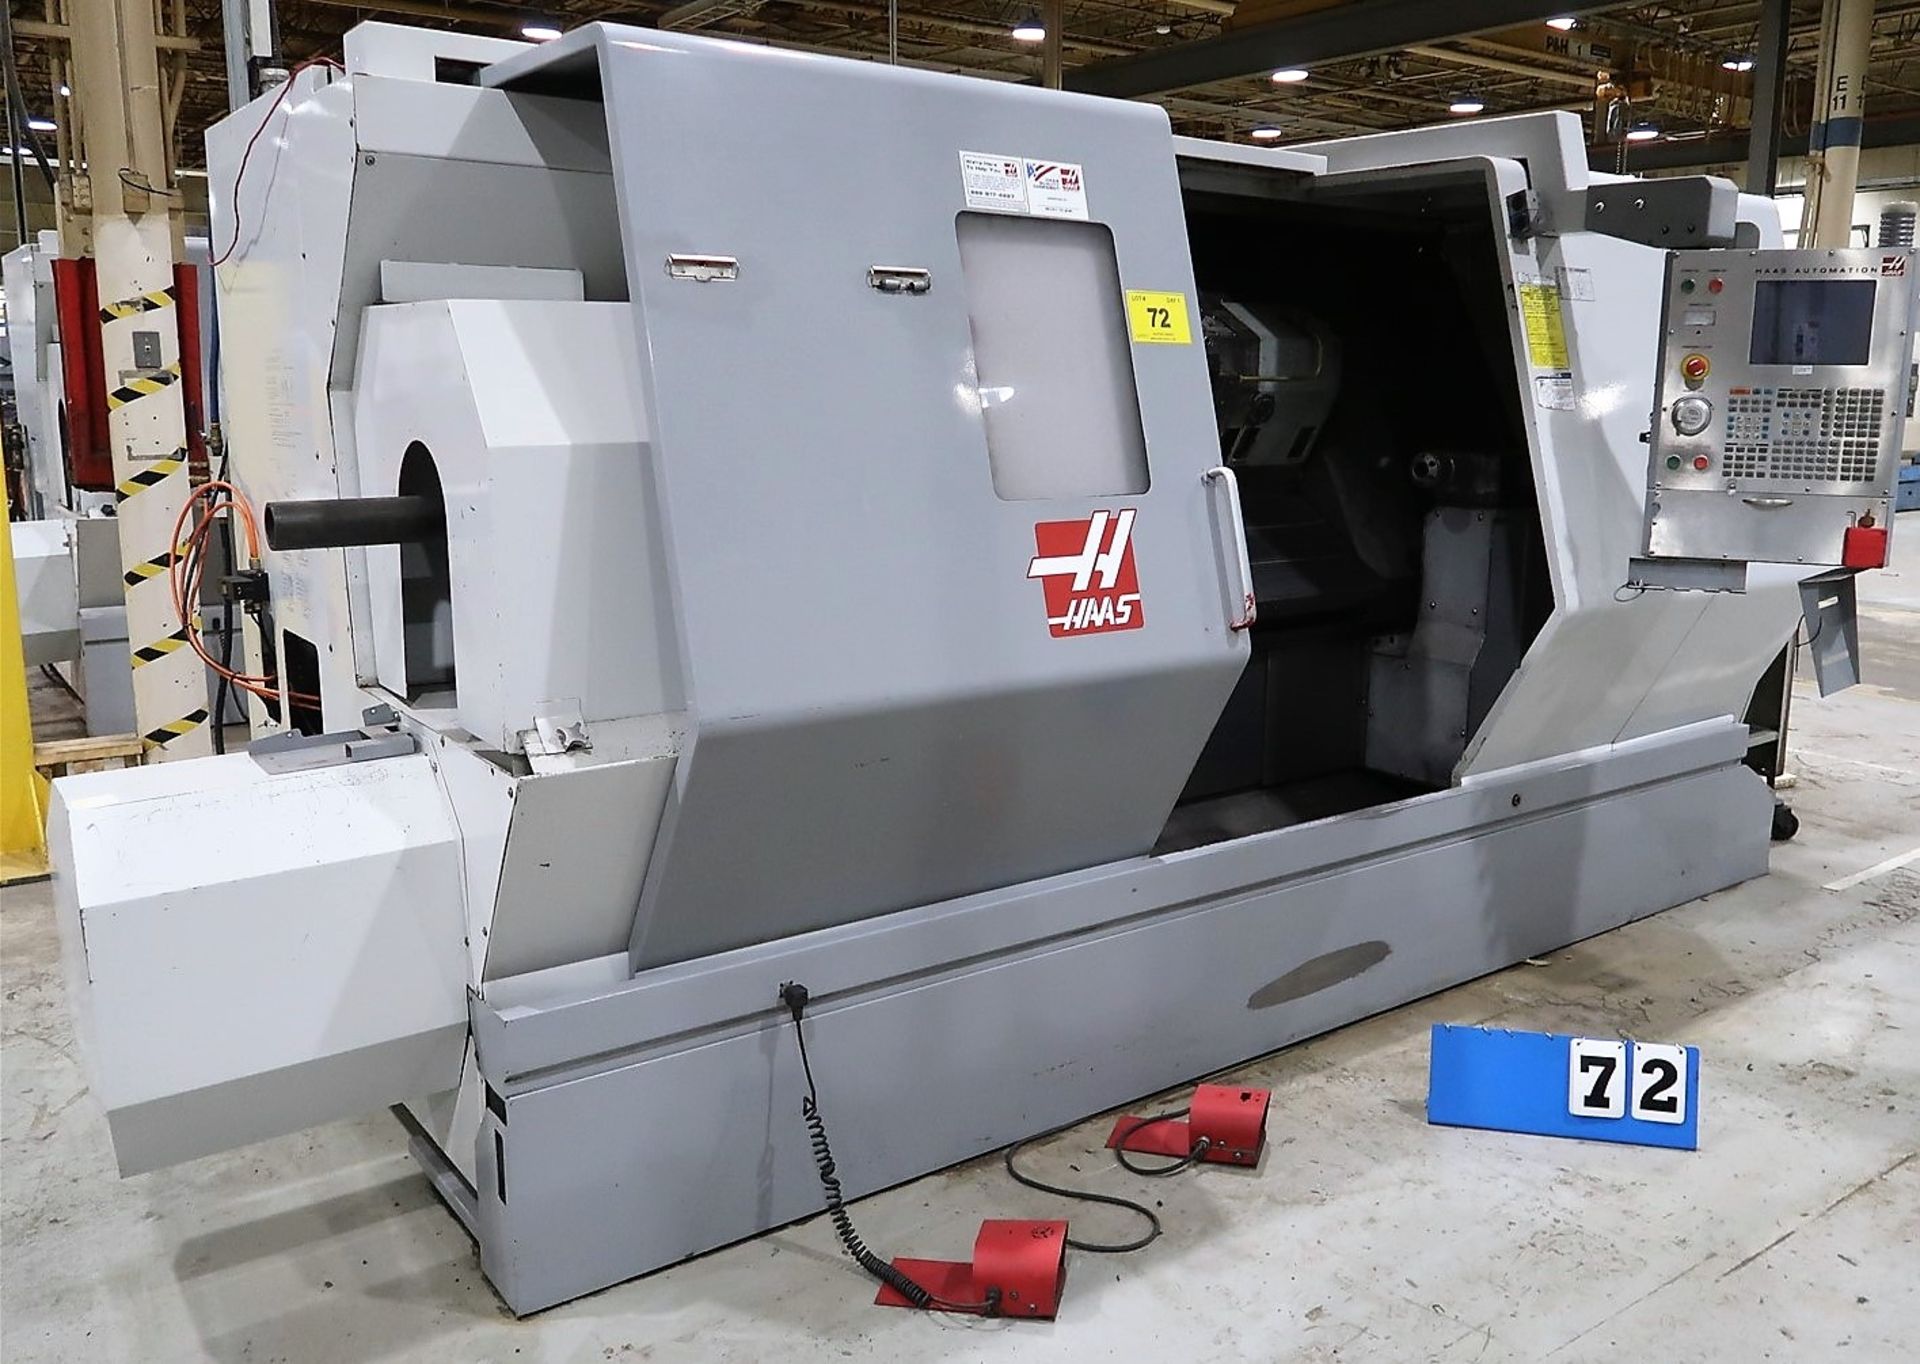 2005 HAAS SL-40TB CNC HORIZONTAL TURNING CENTER, 7.1 IN. BORE, HAAS CNC CONTROL, 10-STATION